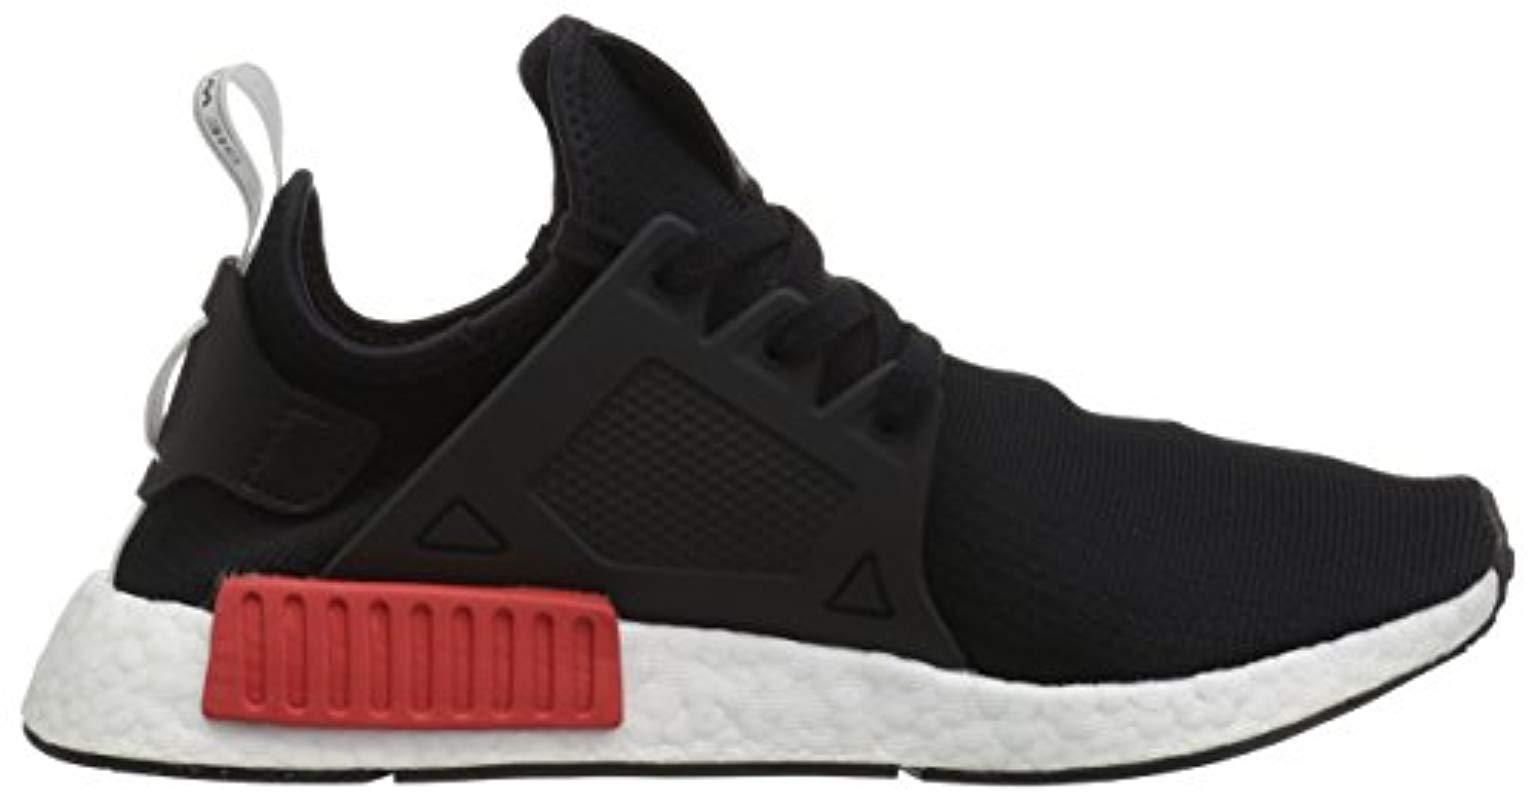 Adidas Nmd Xr1 Jd Sports Core Blue Black for Men Lust